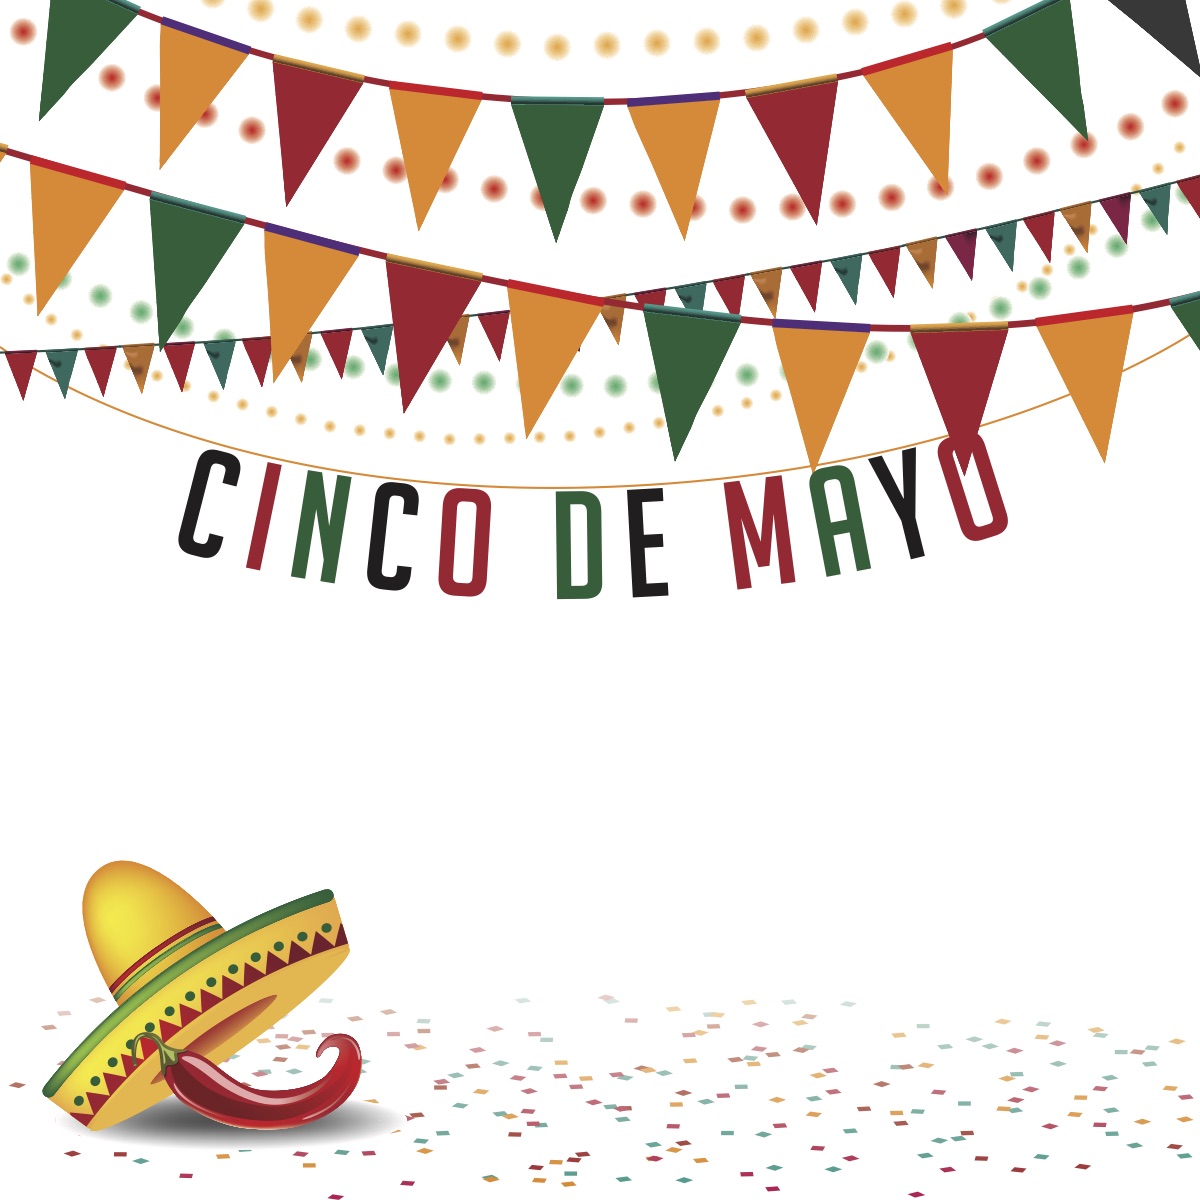 Must Have Products for Cinco de Mayo | The Latin Kitchen